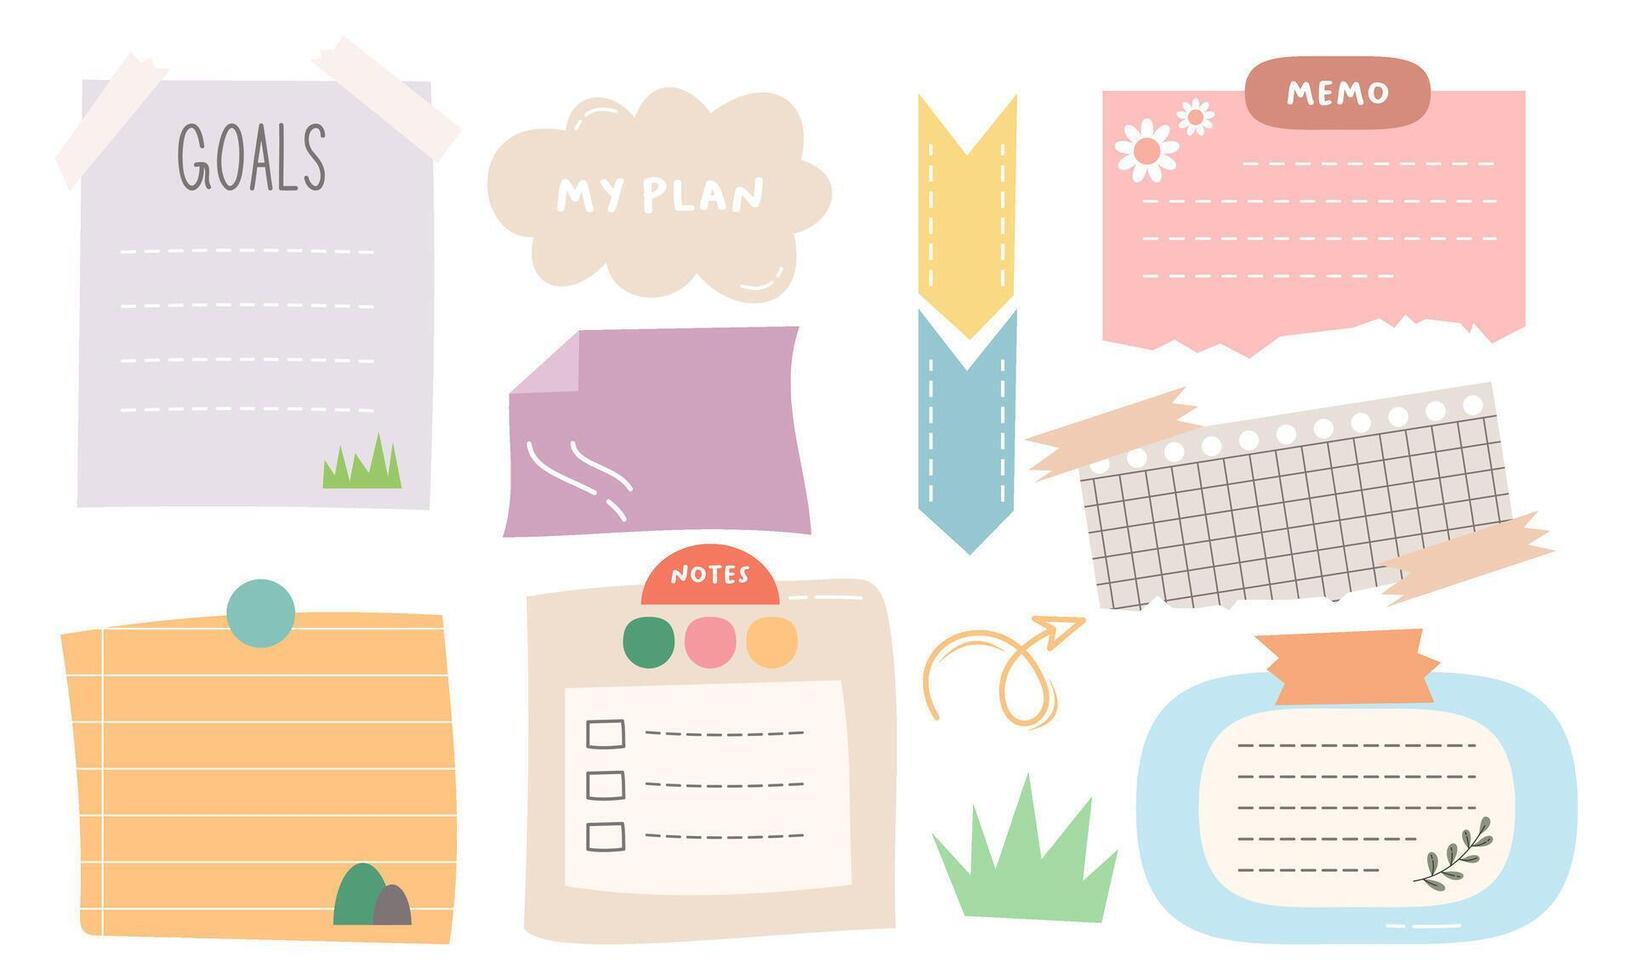 Cute hand drawn planner, journal, notepad, paper vector illustration